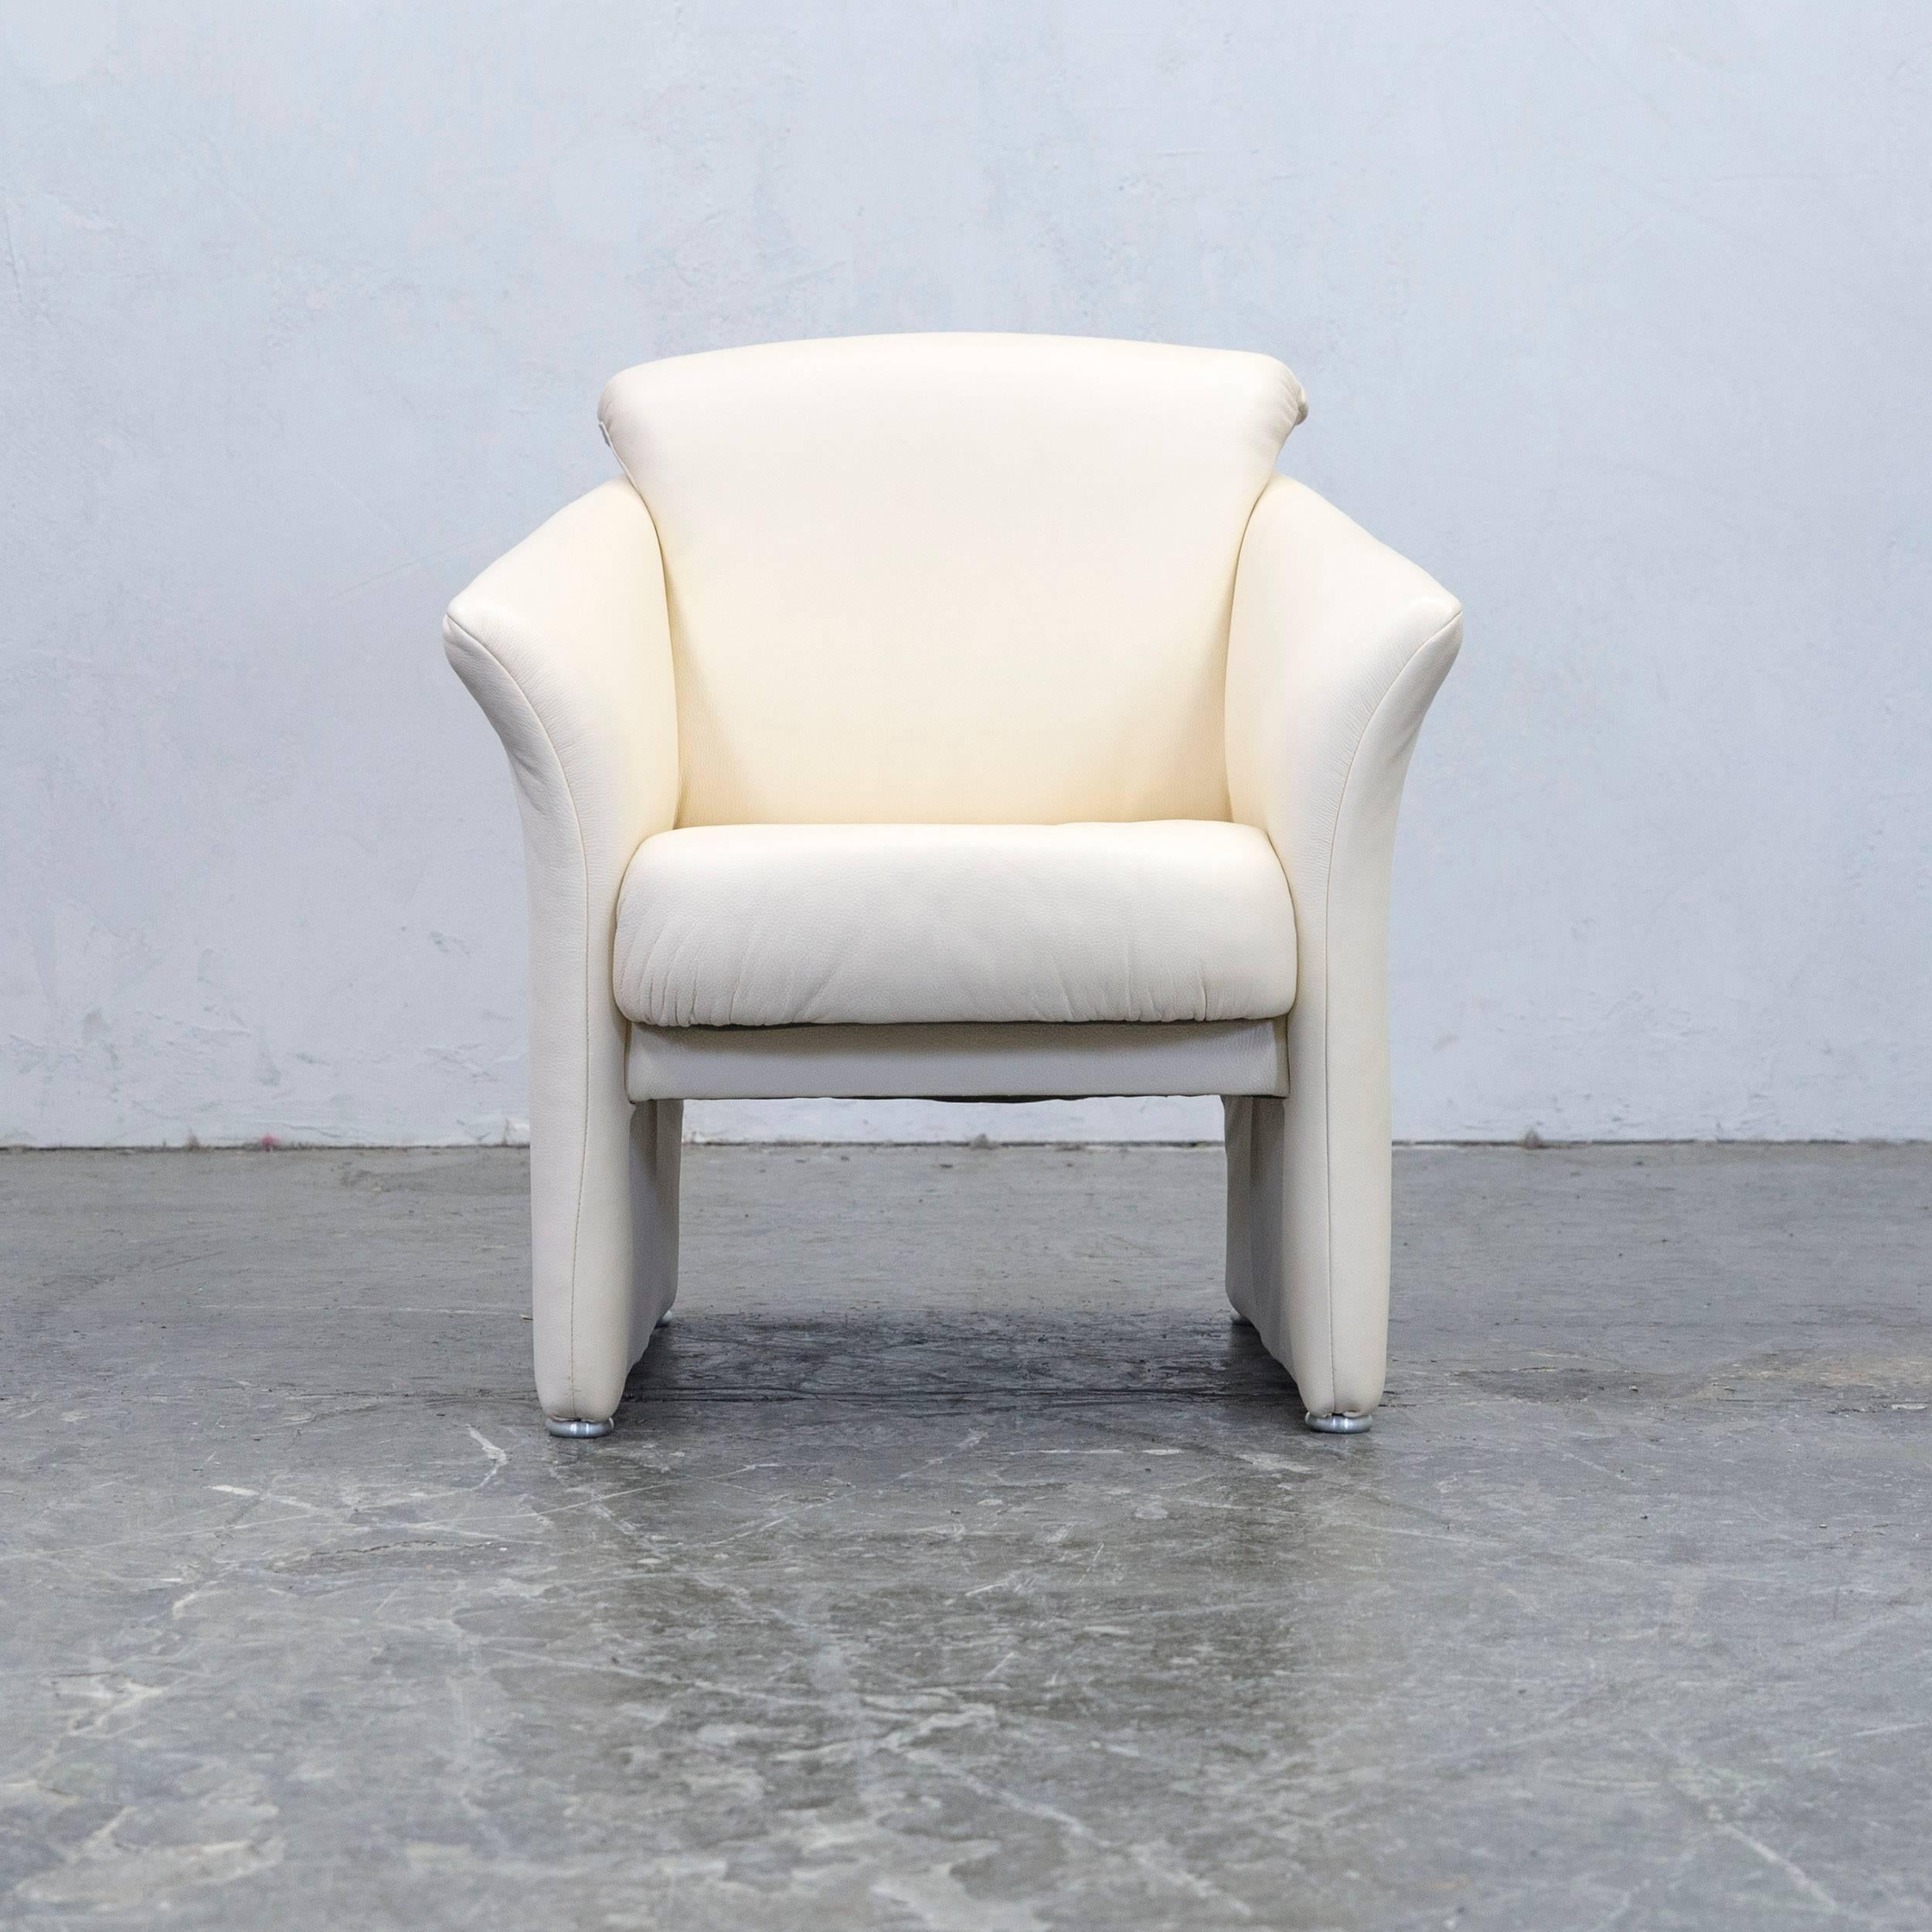 Crème colored designer leather armchair, in a minimalistic and modern design, made for pure comfort.